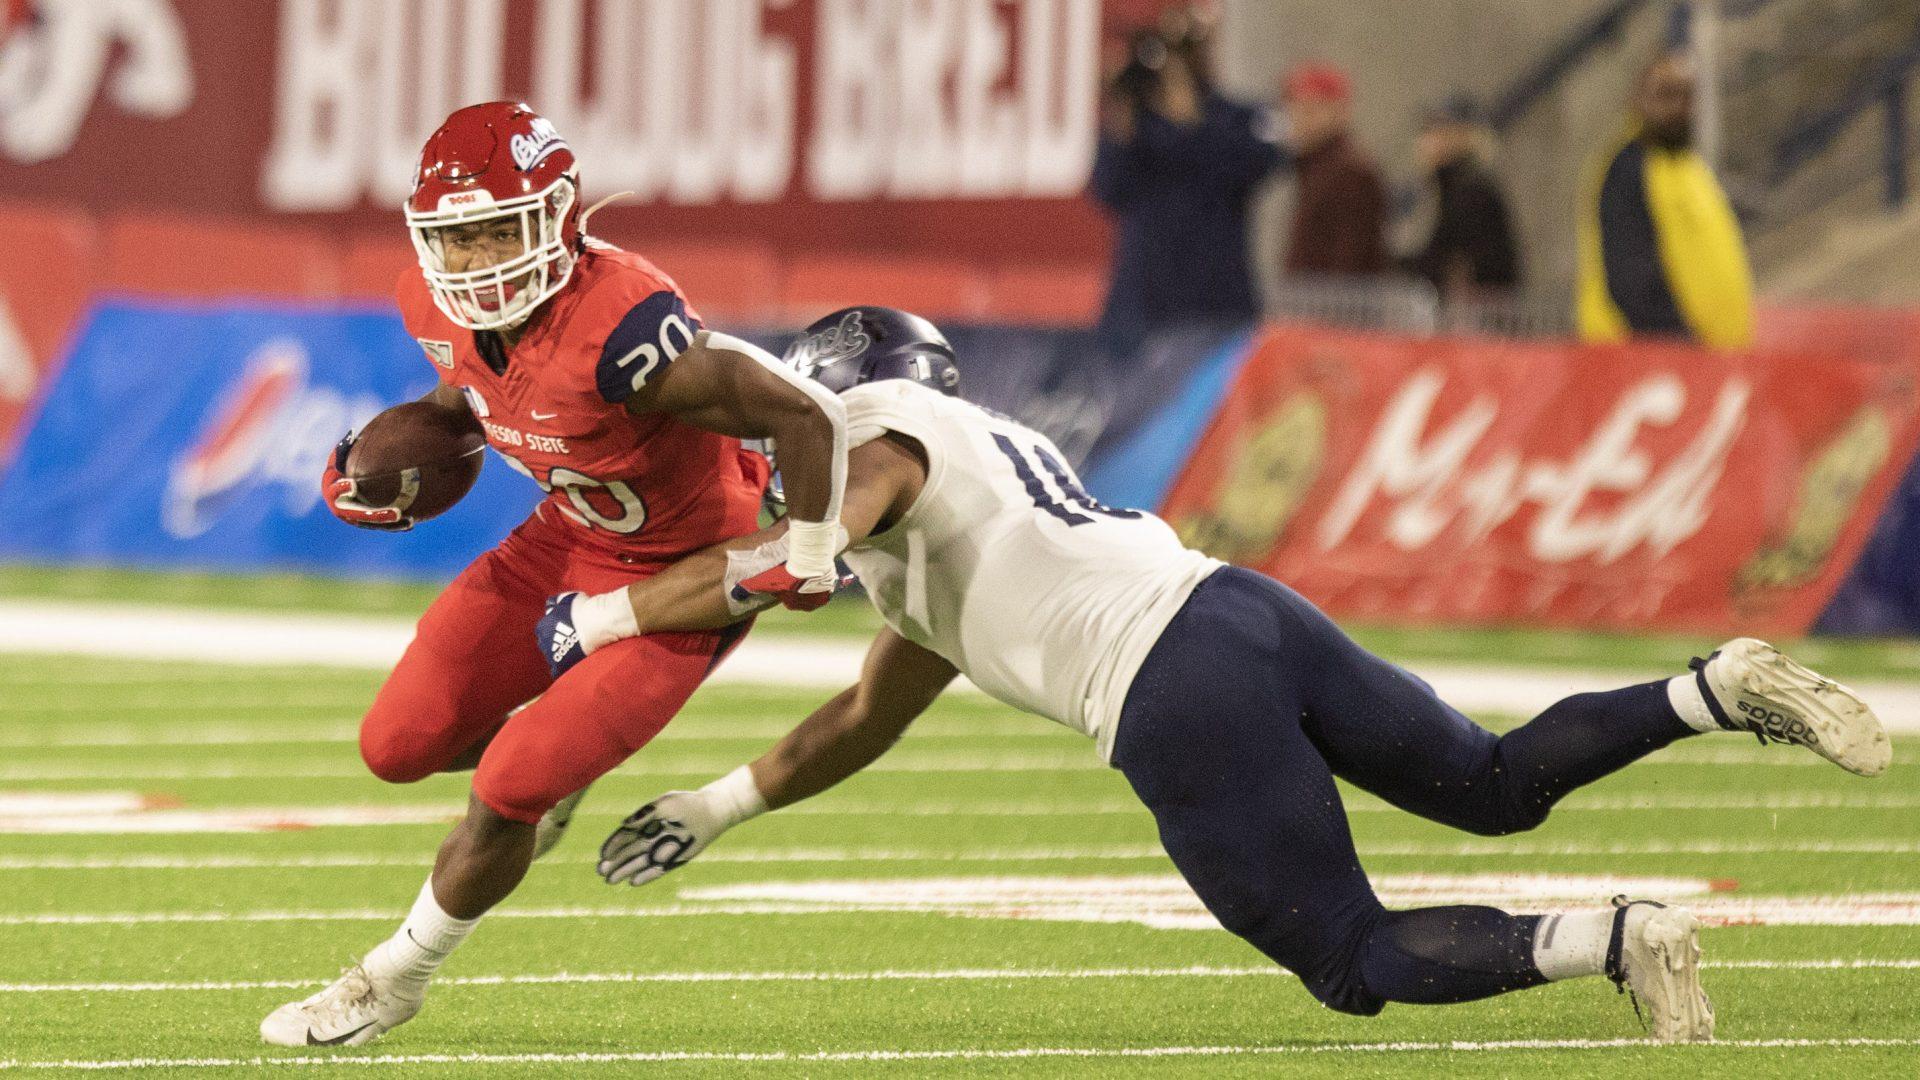  Fresno State running back Ronnie Rivers runs through Nevada defenders during the first half of a home match at Bulldog Stadium on Saturday, November 23, 2019 (Armando Carreno/The Collegian)